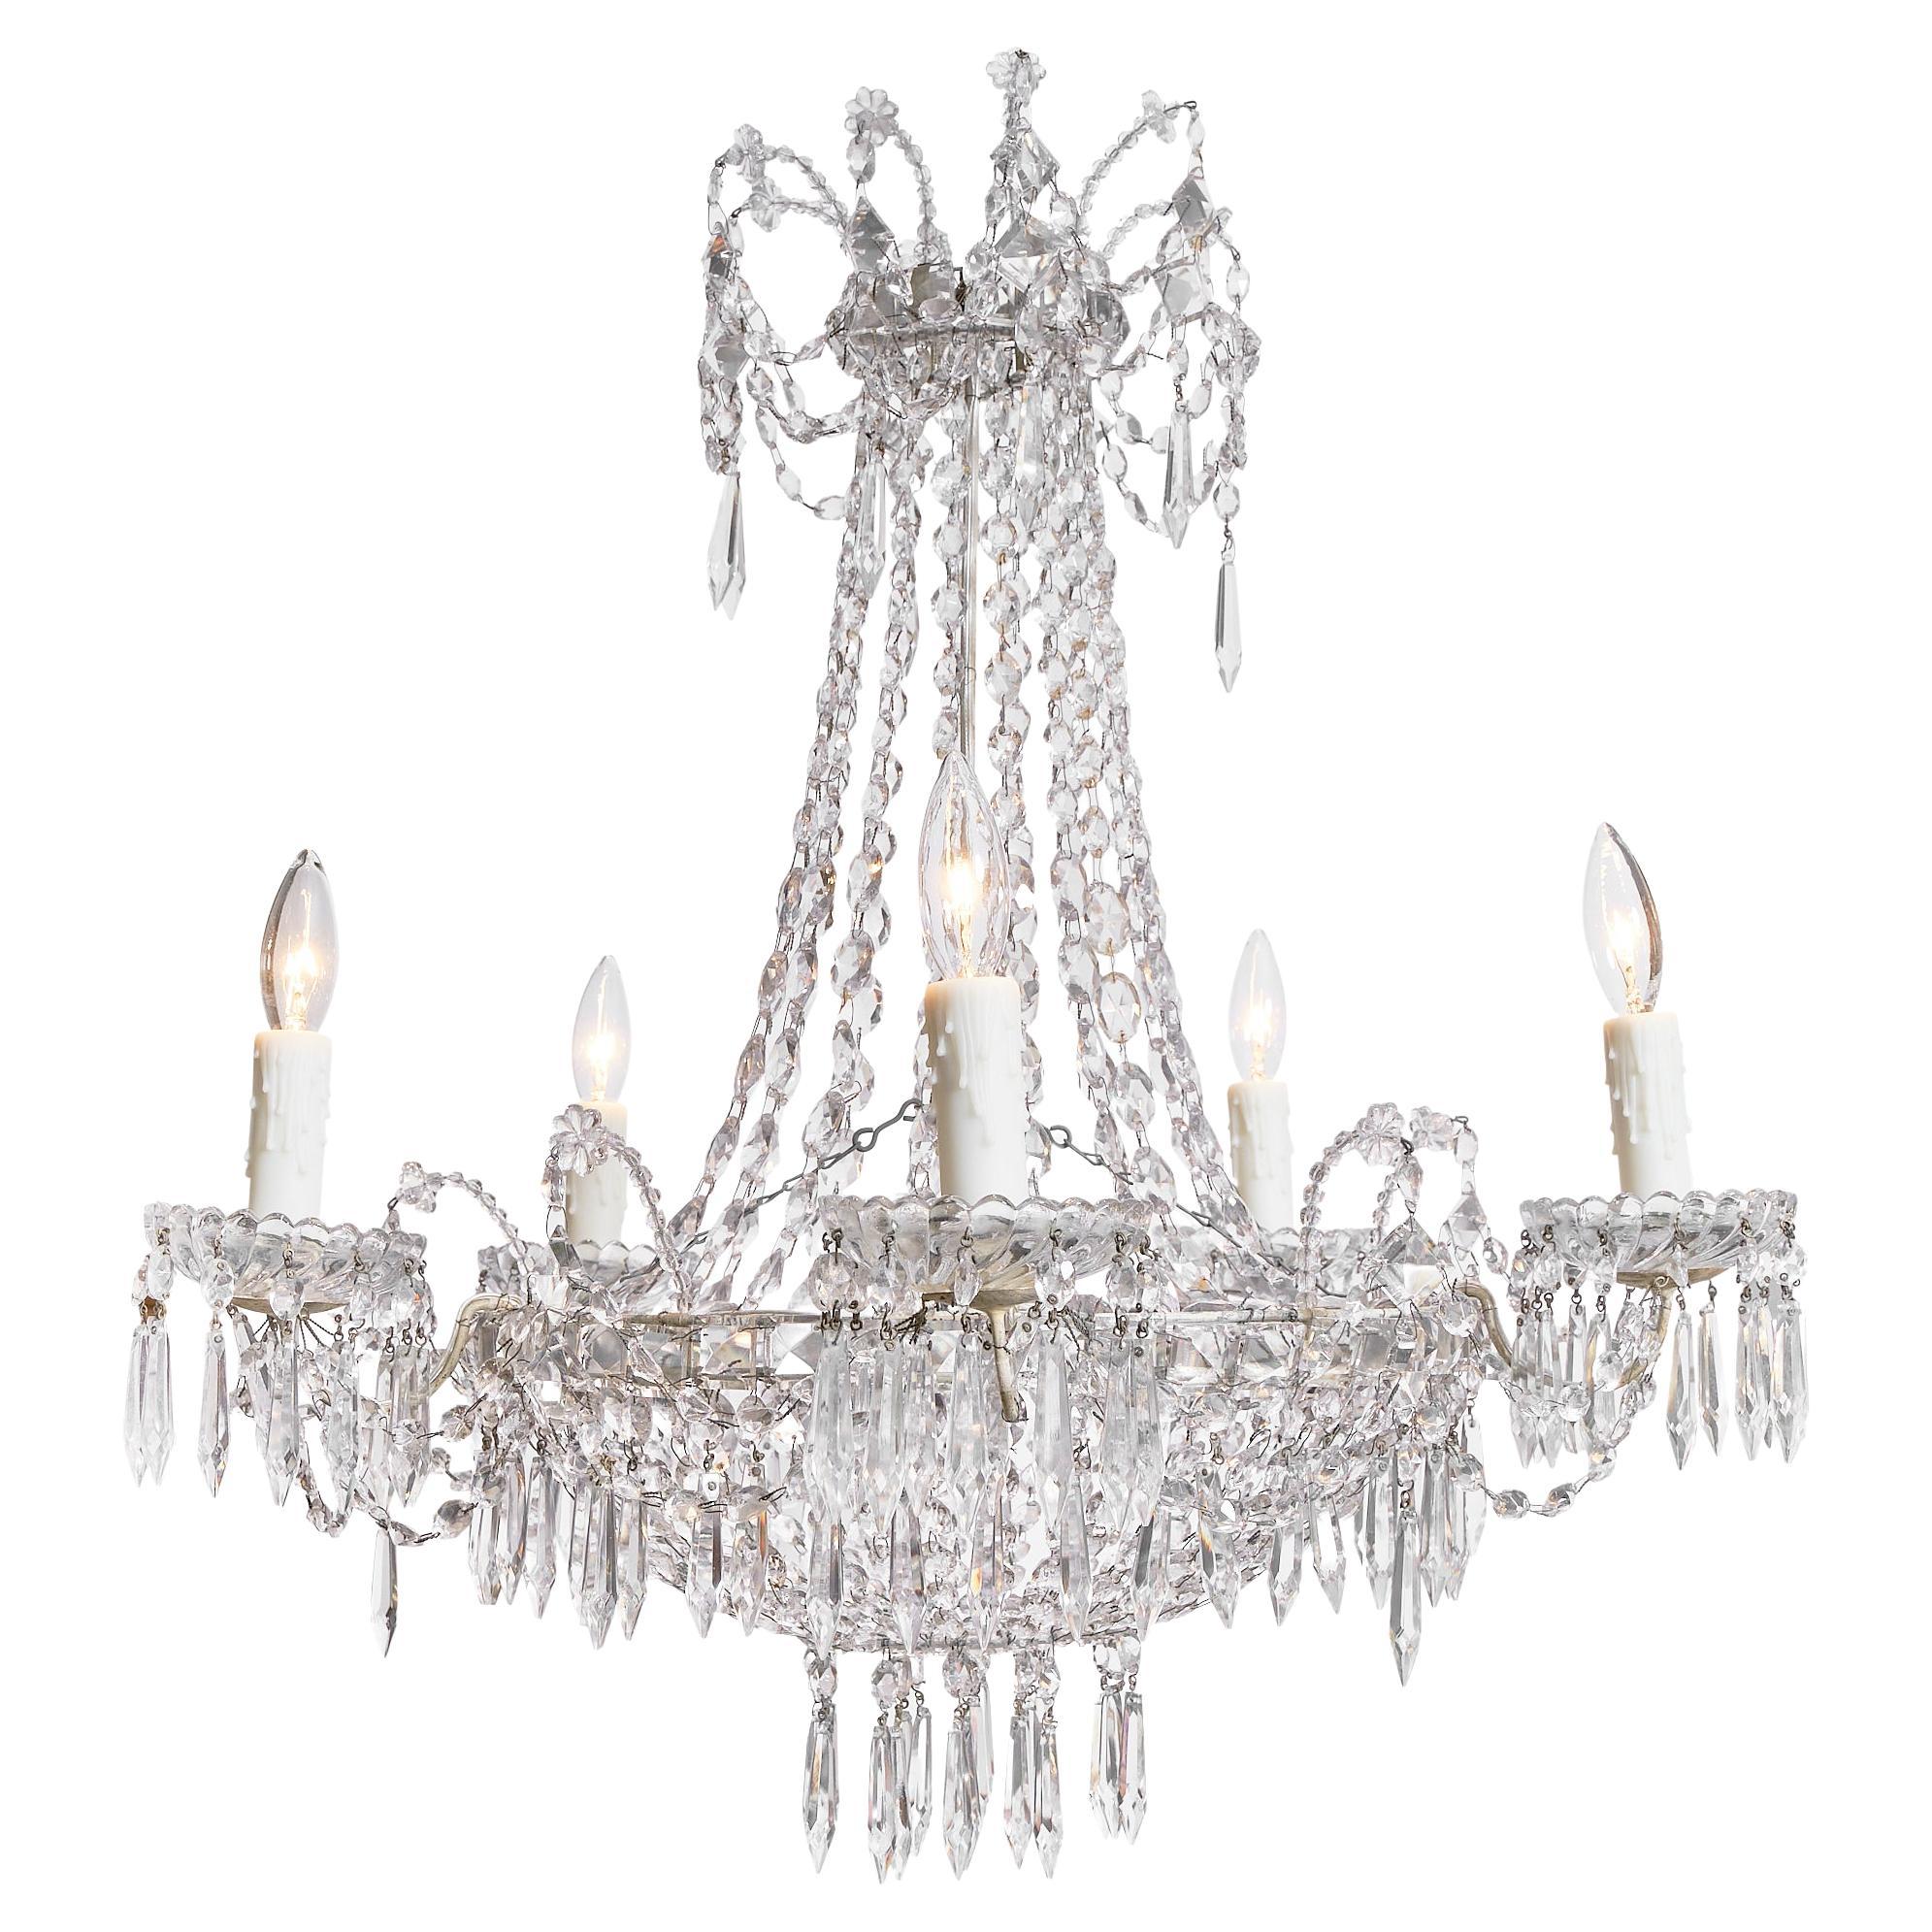 Antique French Baccarat “Corbeille” Chandelier